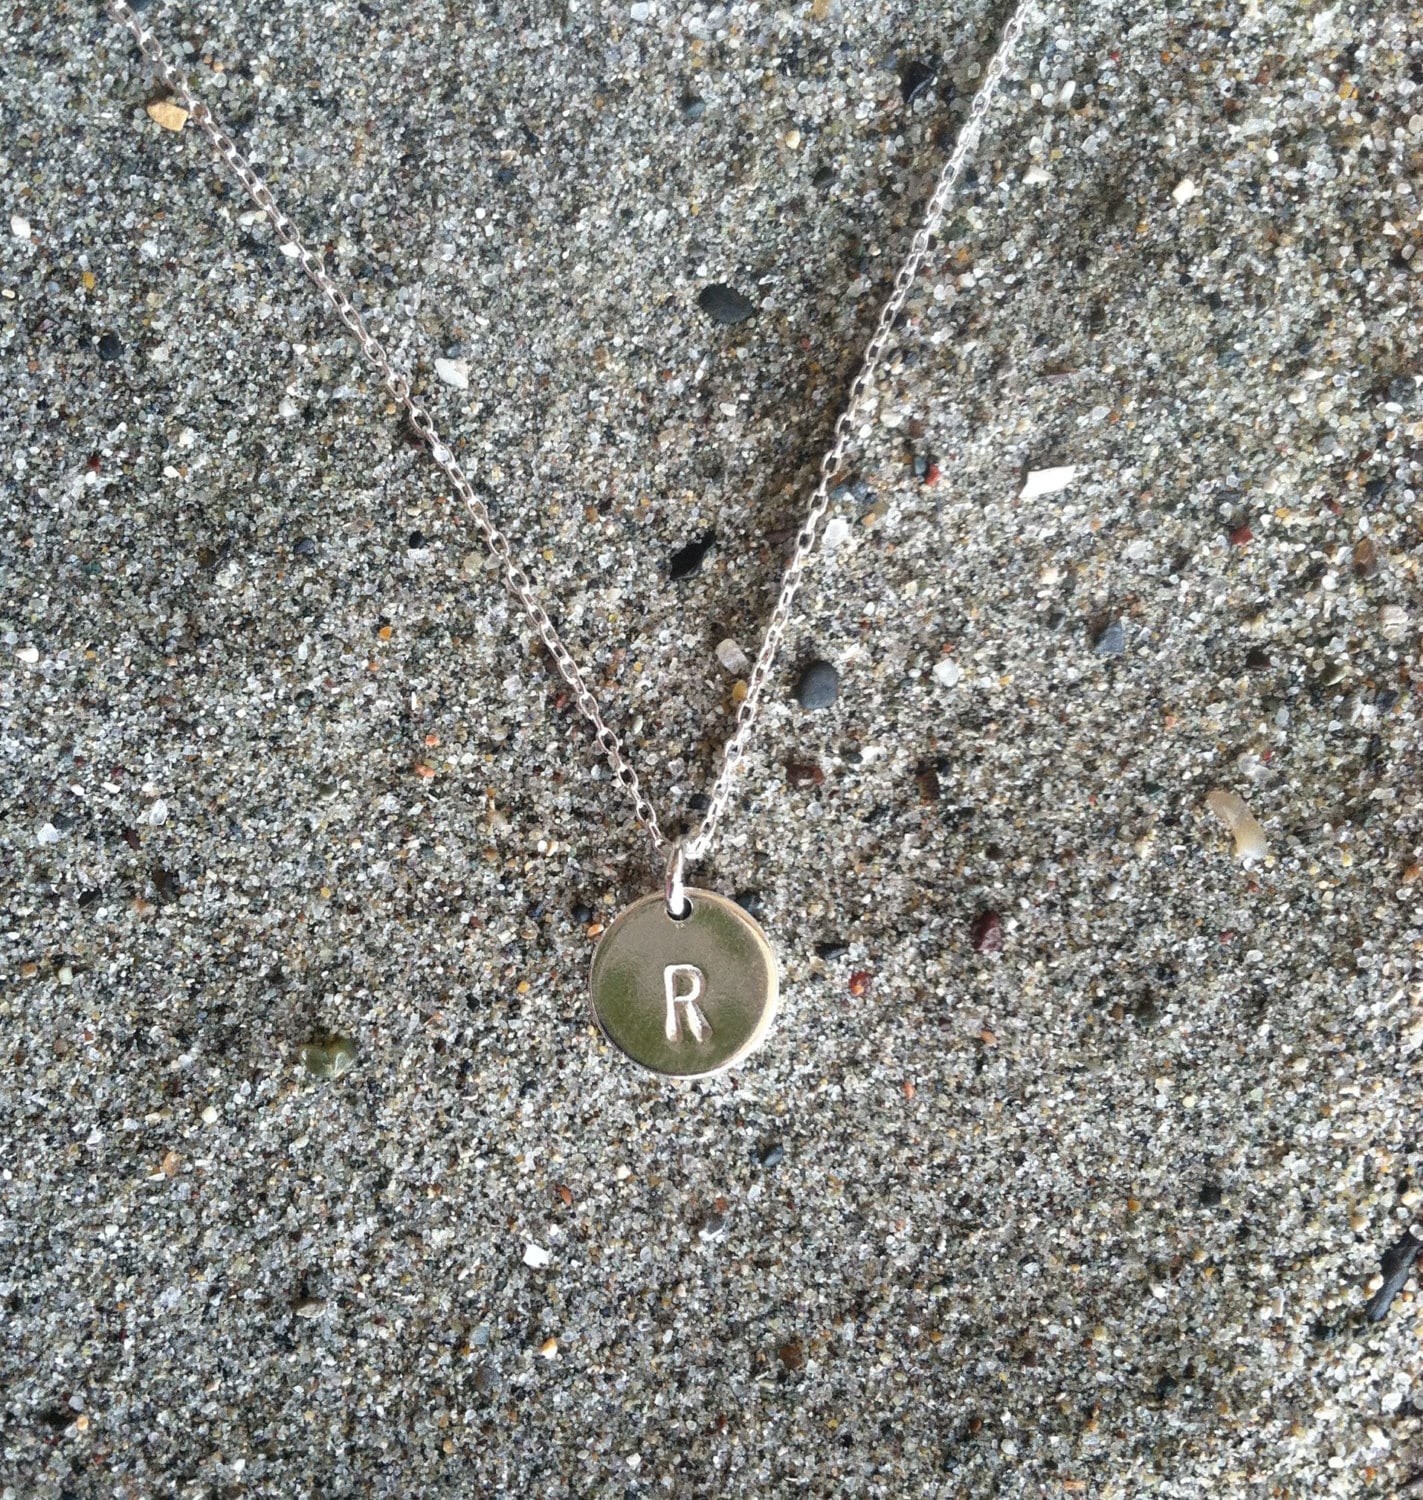 Tiny Monogram Necklace, Initial Necklace, Sterling Silver Round Charm